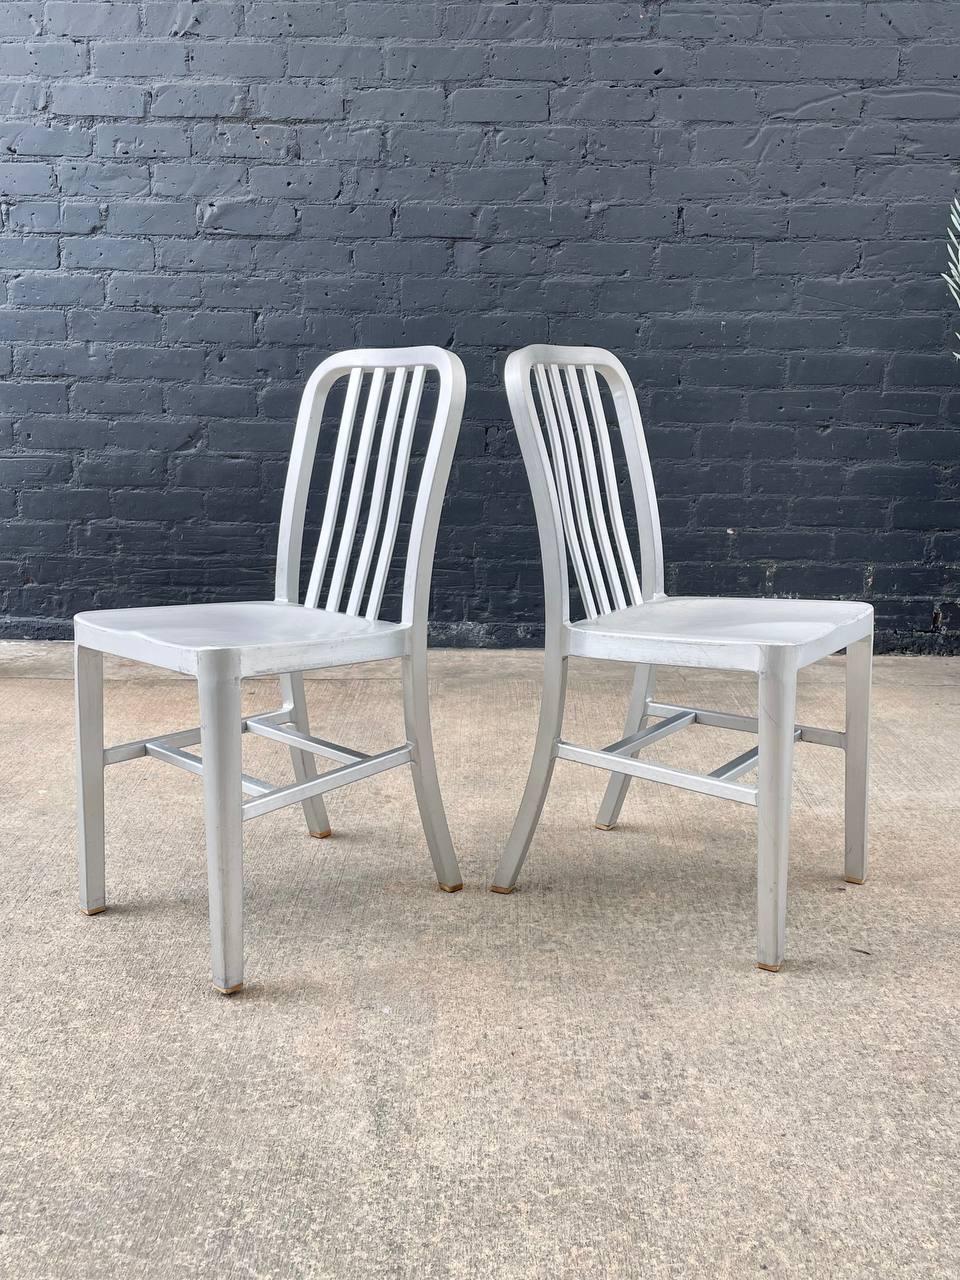 American Set of 4 Navy Industrial Aluminum Dining Chairs